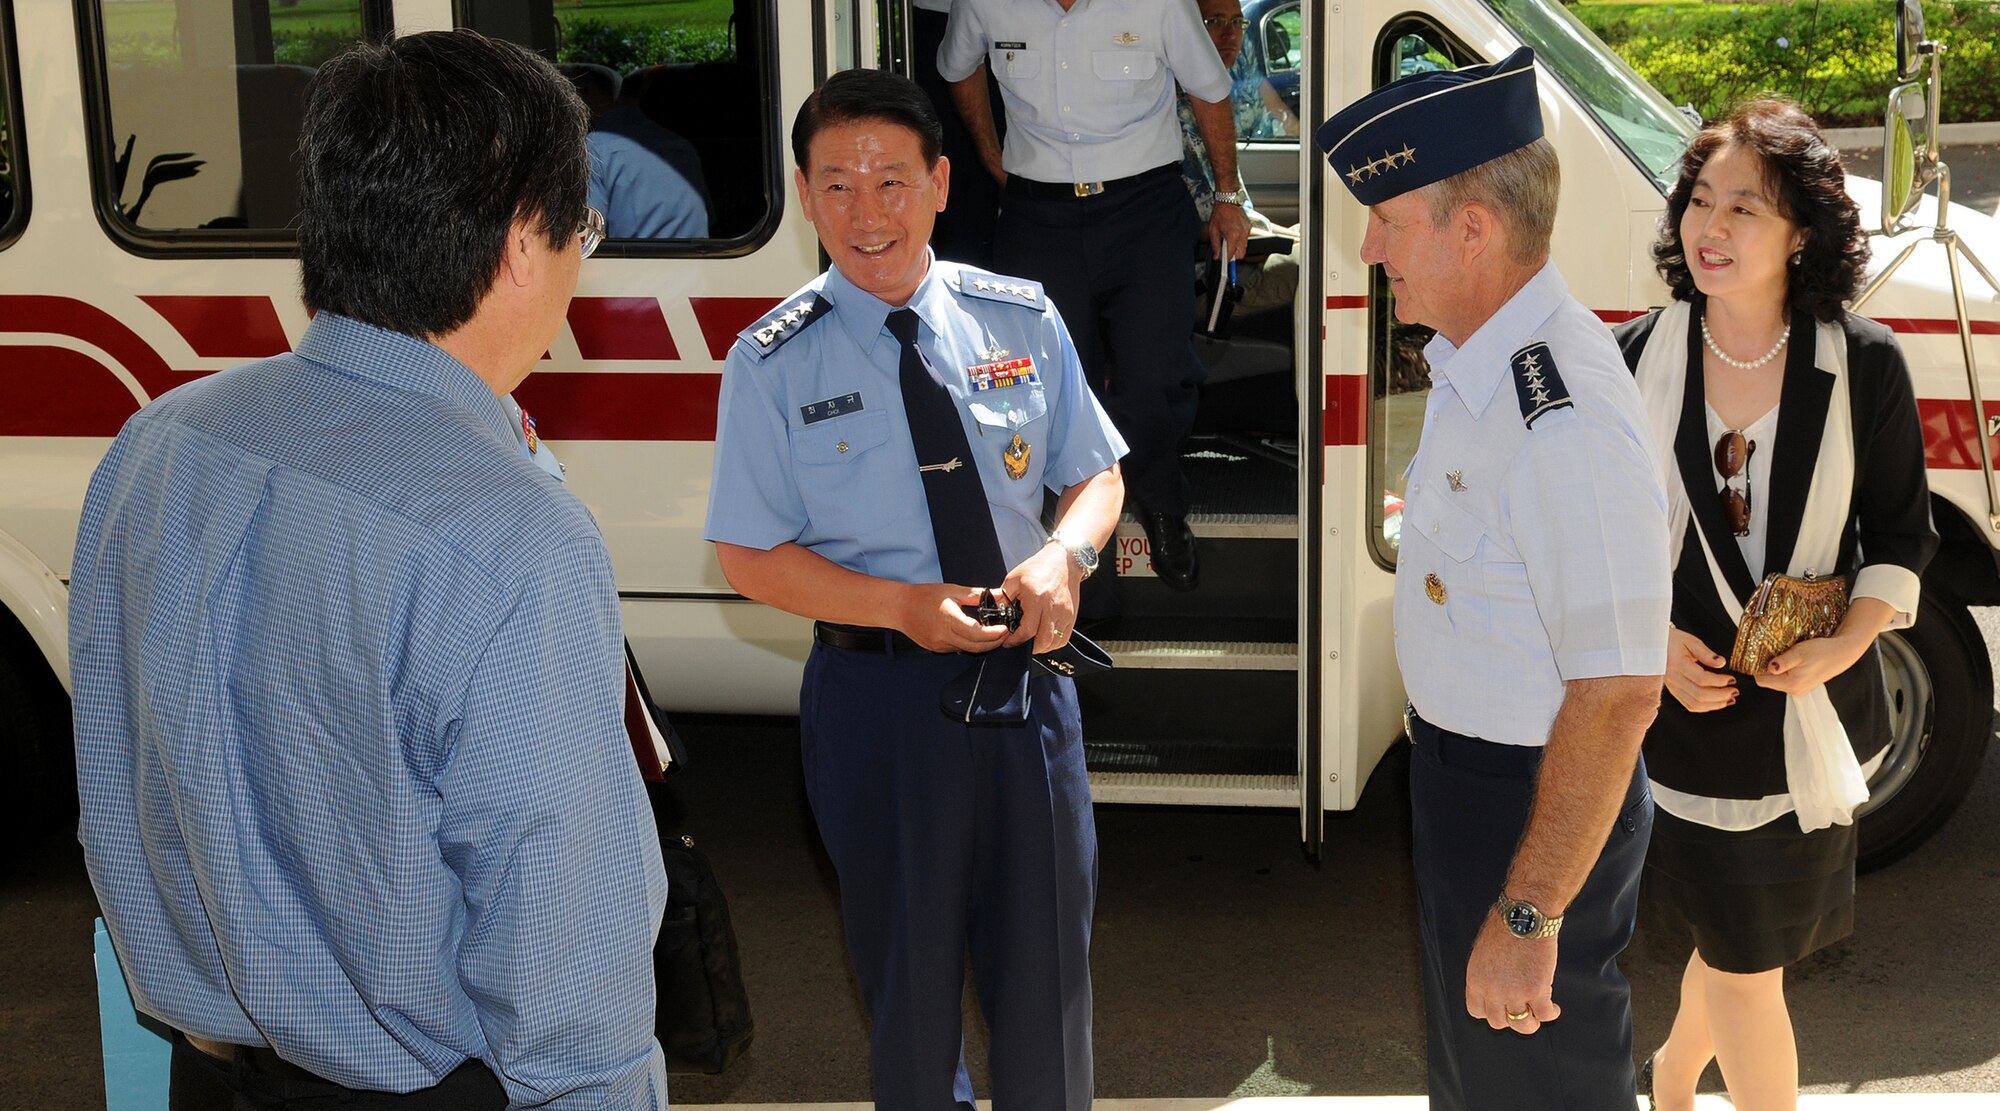 Mr. Brian Woo, Pacific Air Forces political advisor and Gen. Herbert J. “Hawk” Carlisle, Pacific Air Forces commander, welcomes Lt. Gen. Cha-Kyu Choi, Republic of Korea, Air Force Vice Chief of Staff (center) and his spouse Mrs. Jae Oak Yoon (far left) to PACAF headquarters, Joint Base Pearl Harbor-Hickam, Hawaii, Nov. 9, 2012. Choi visited Hawaii to meet with Carlisle to discuss ways to further improved support and cooperation with U.S. forces in the Asia-Pacific. (U.S. Air Force Photo/Tech. Sgt. Jerome S. Tayborn/Released)